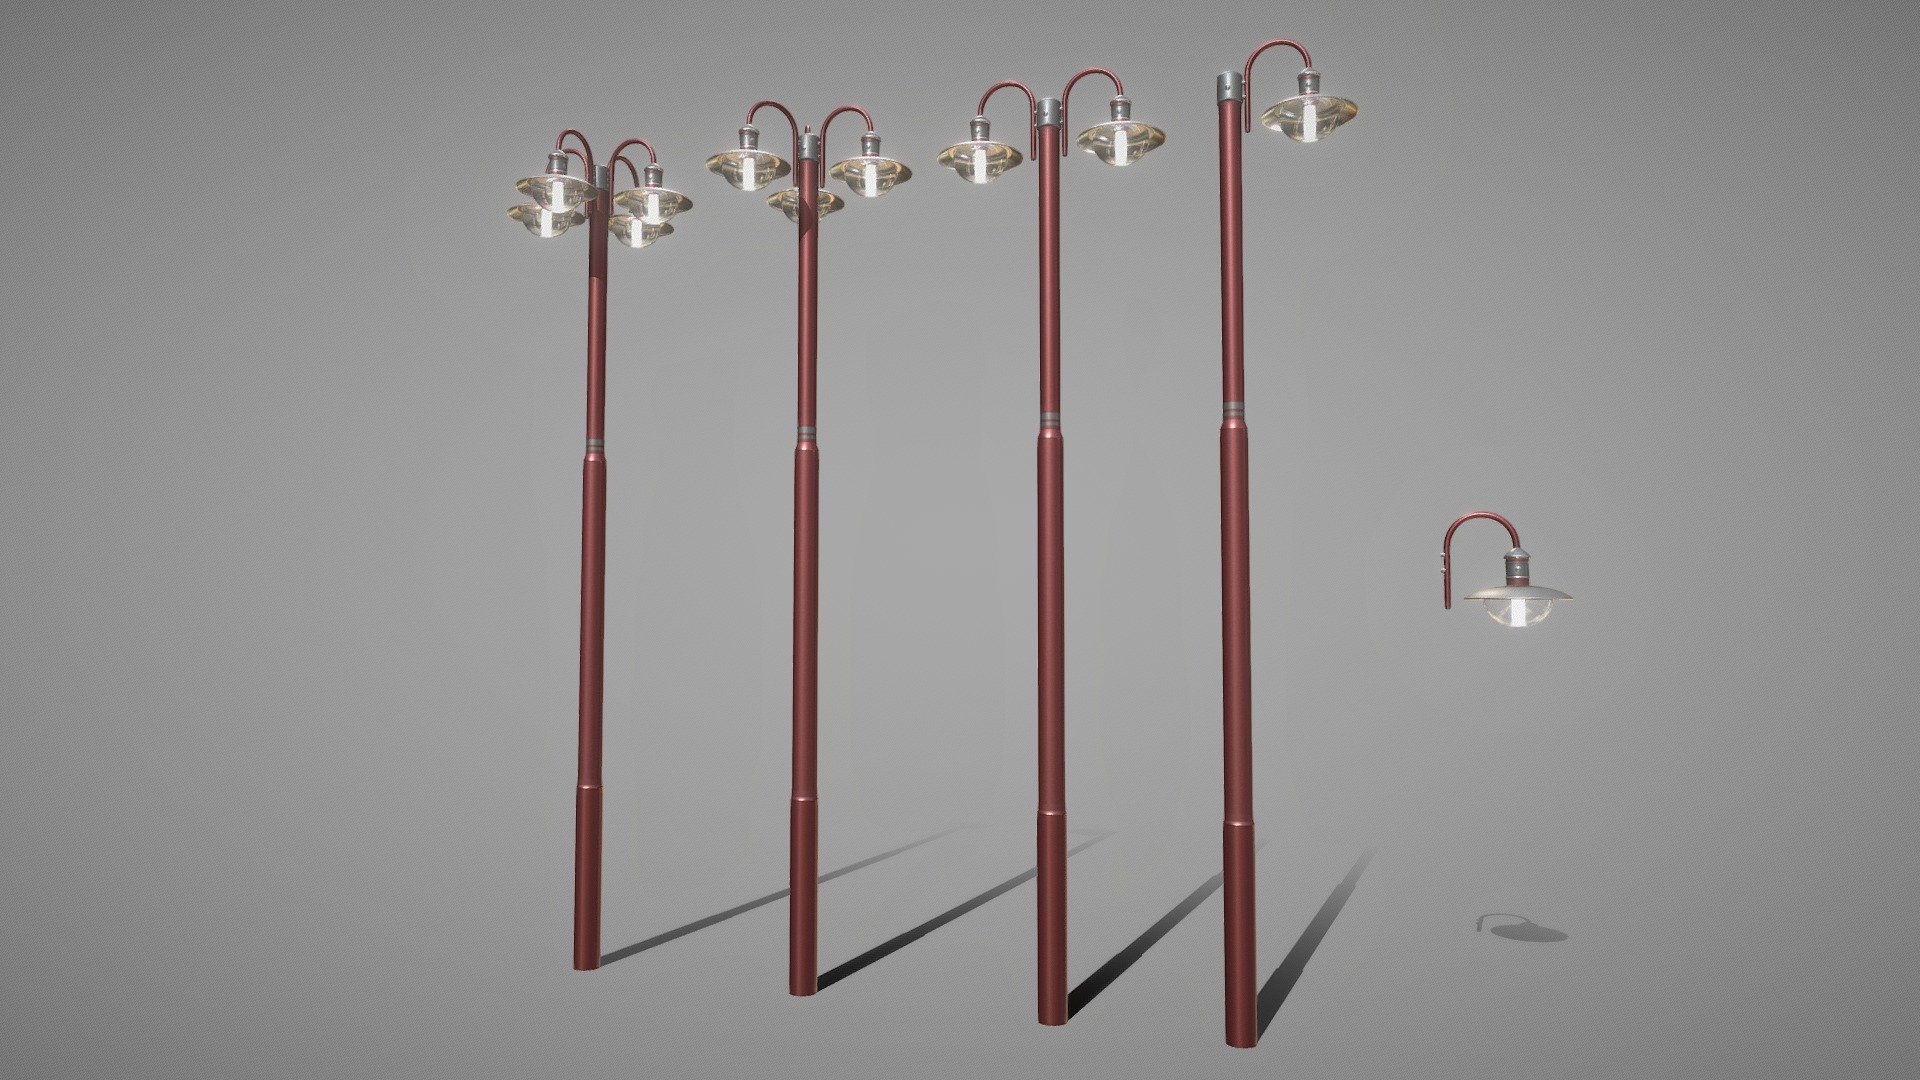 The red low-poly version of street light number 7.




Street Light (7) (Basic High-Poly Version) Total triangles 2M 

Street Light (7) (Basic Low-Poly Version)

Street Light (7) Matt Black Version 

Street Light (7) Moss Green Version

Street Light (7) Galvanized Iron Version



**Here are some other street lights: **




Street Light (1) Station Clock (High-Poly)

Street Light (2) Wall-Version (High-Poly)

Street Light (3) (Low-Poly Version)

Street Light (4) (High-Poly Version)

Street Light (5) High-Poly Version 

Street Light (6) (Low-Poly Red Version)



Modeled and textured by 3DHaupt in Blender-3D - Street Light (7) Red Version - Buy Royalty Free 3D model by VIS-All-3D (@VIS-All) 3d model